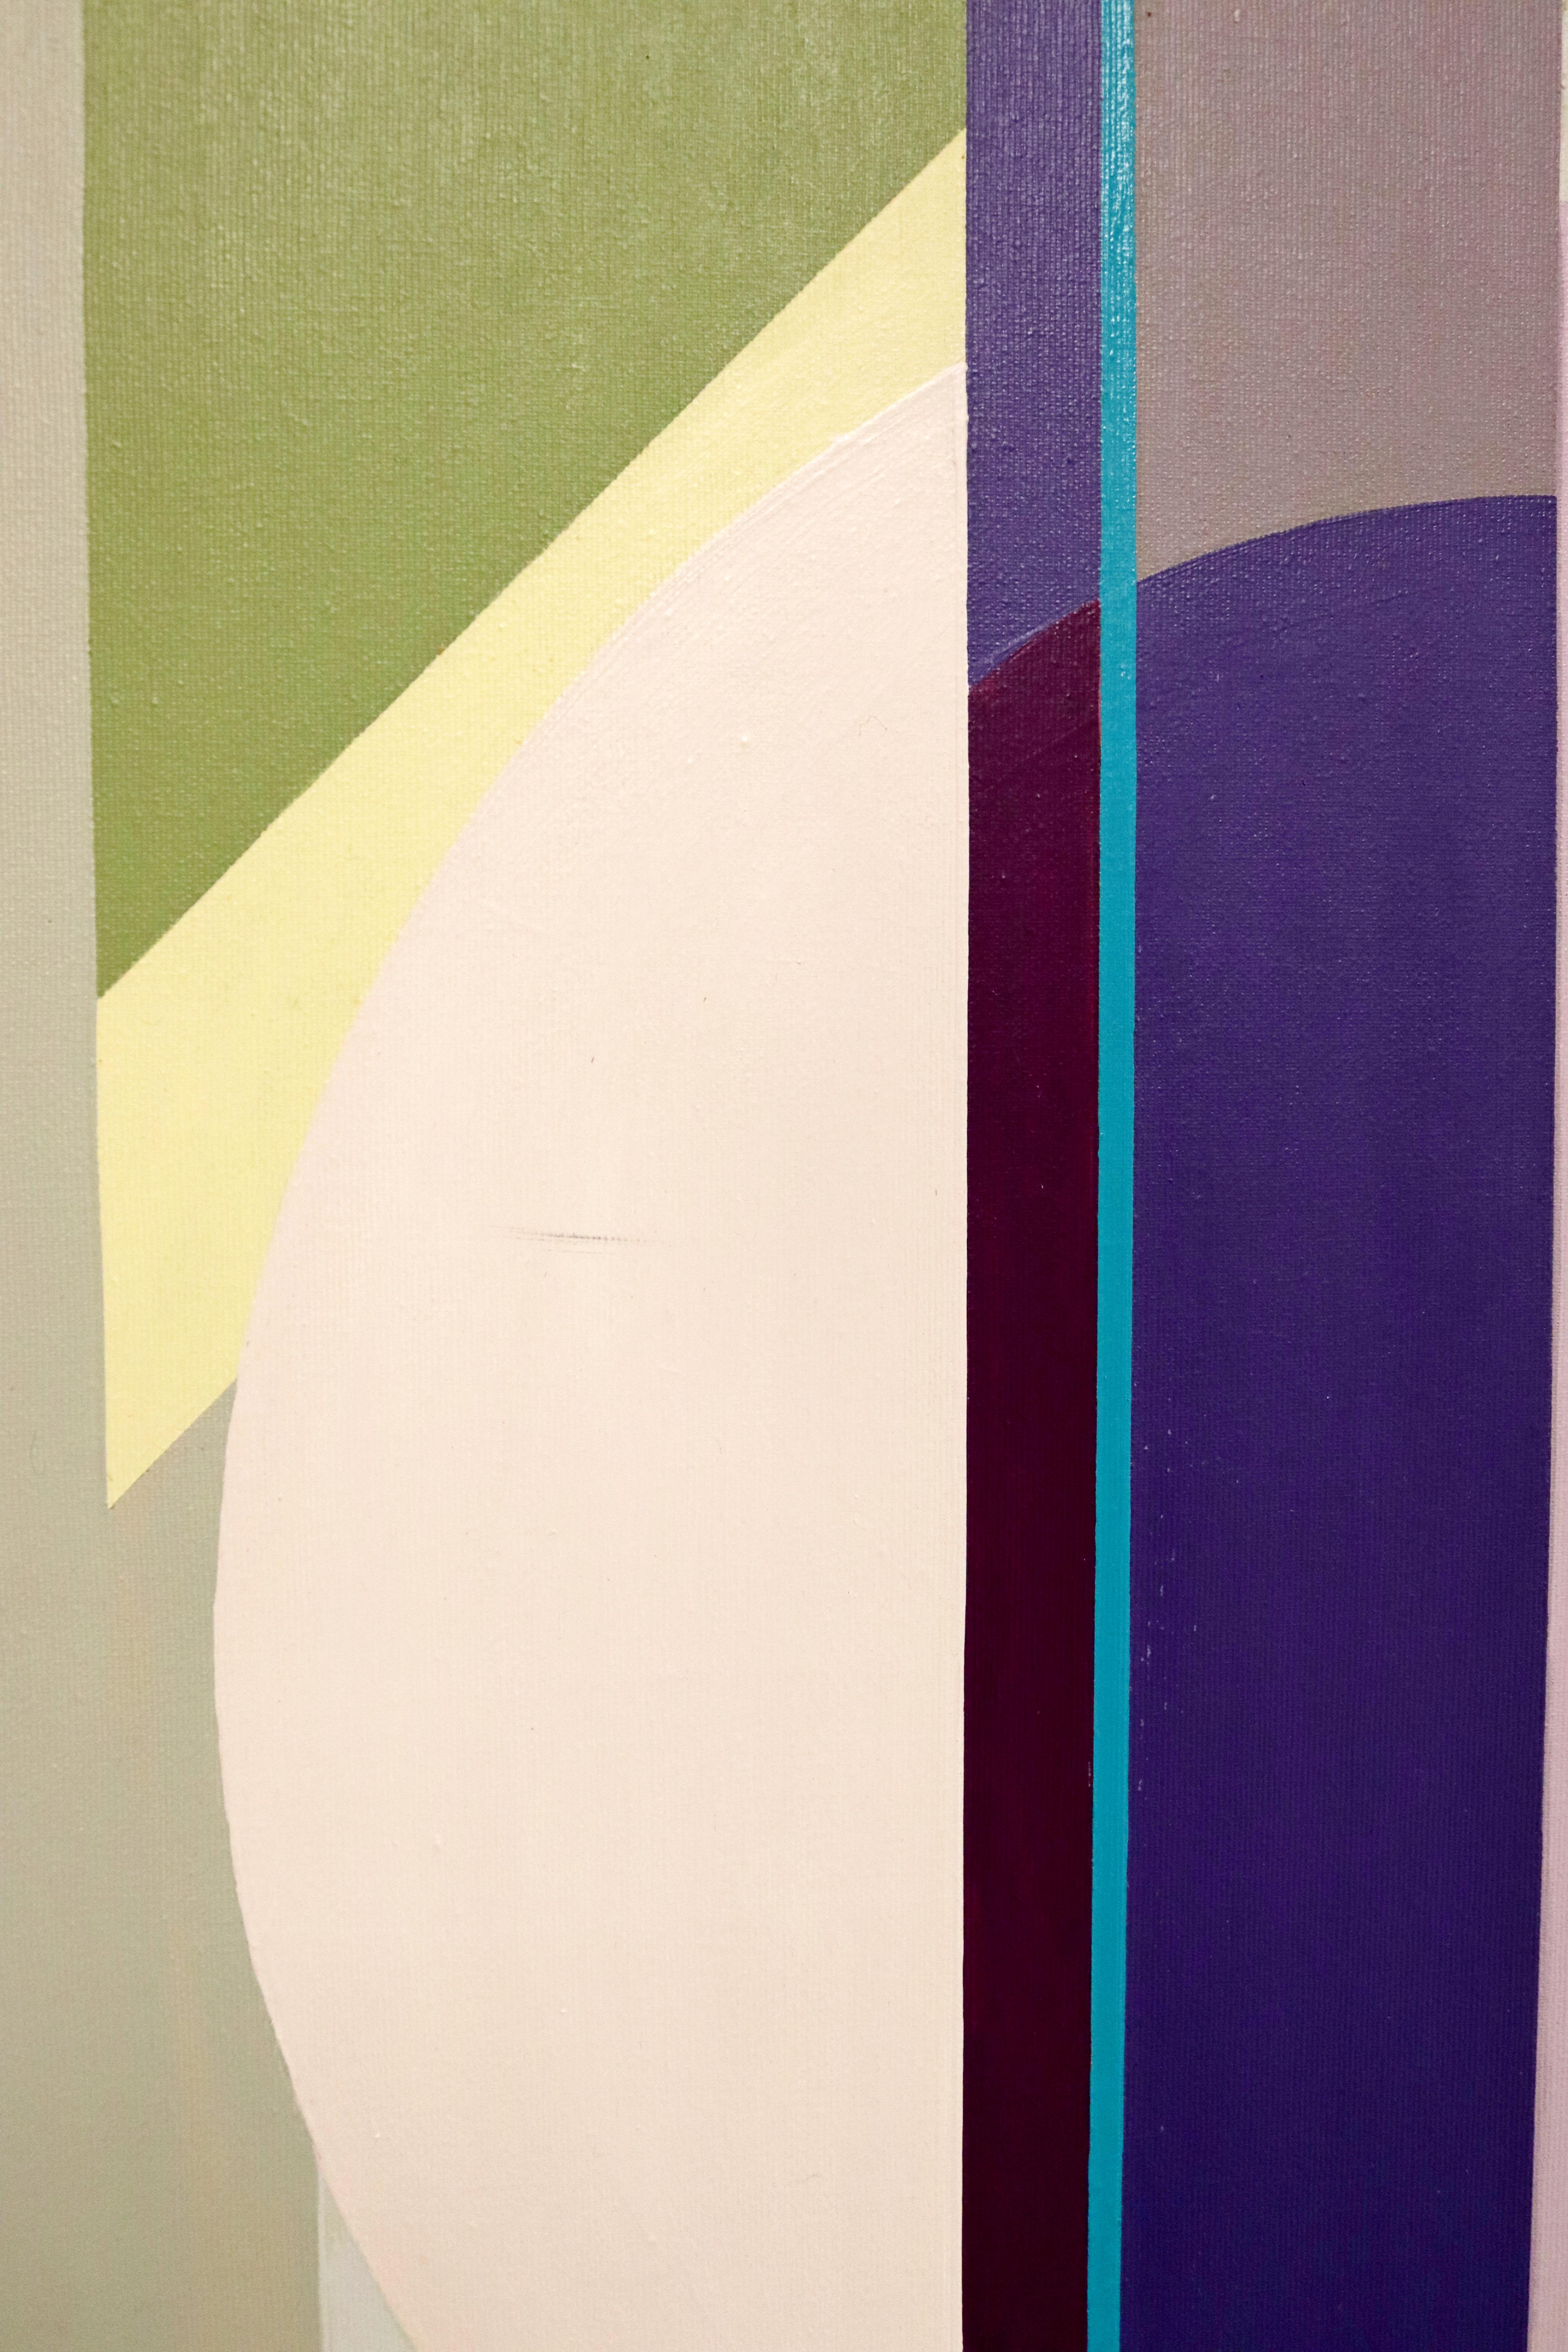 Contemporary Modernist Gunda Hass Signed Acrylic Painting on Canvas Green Purple Gray, 2010s For Sale